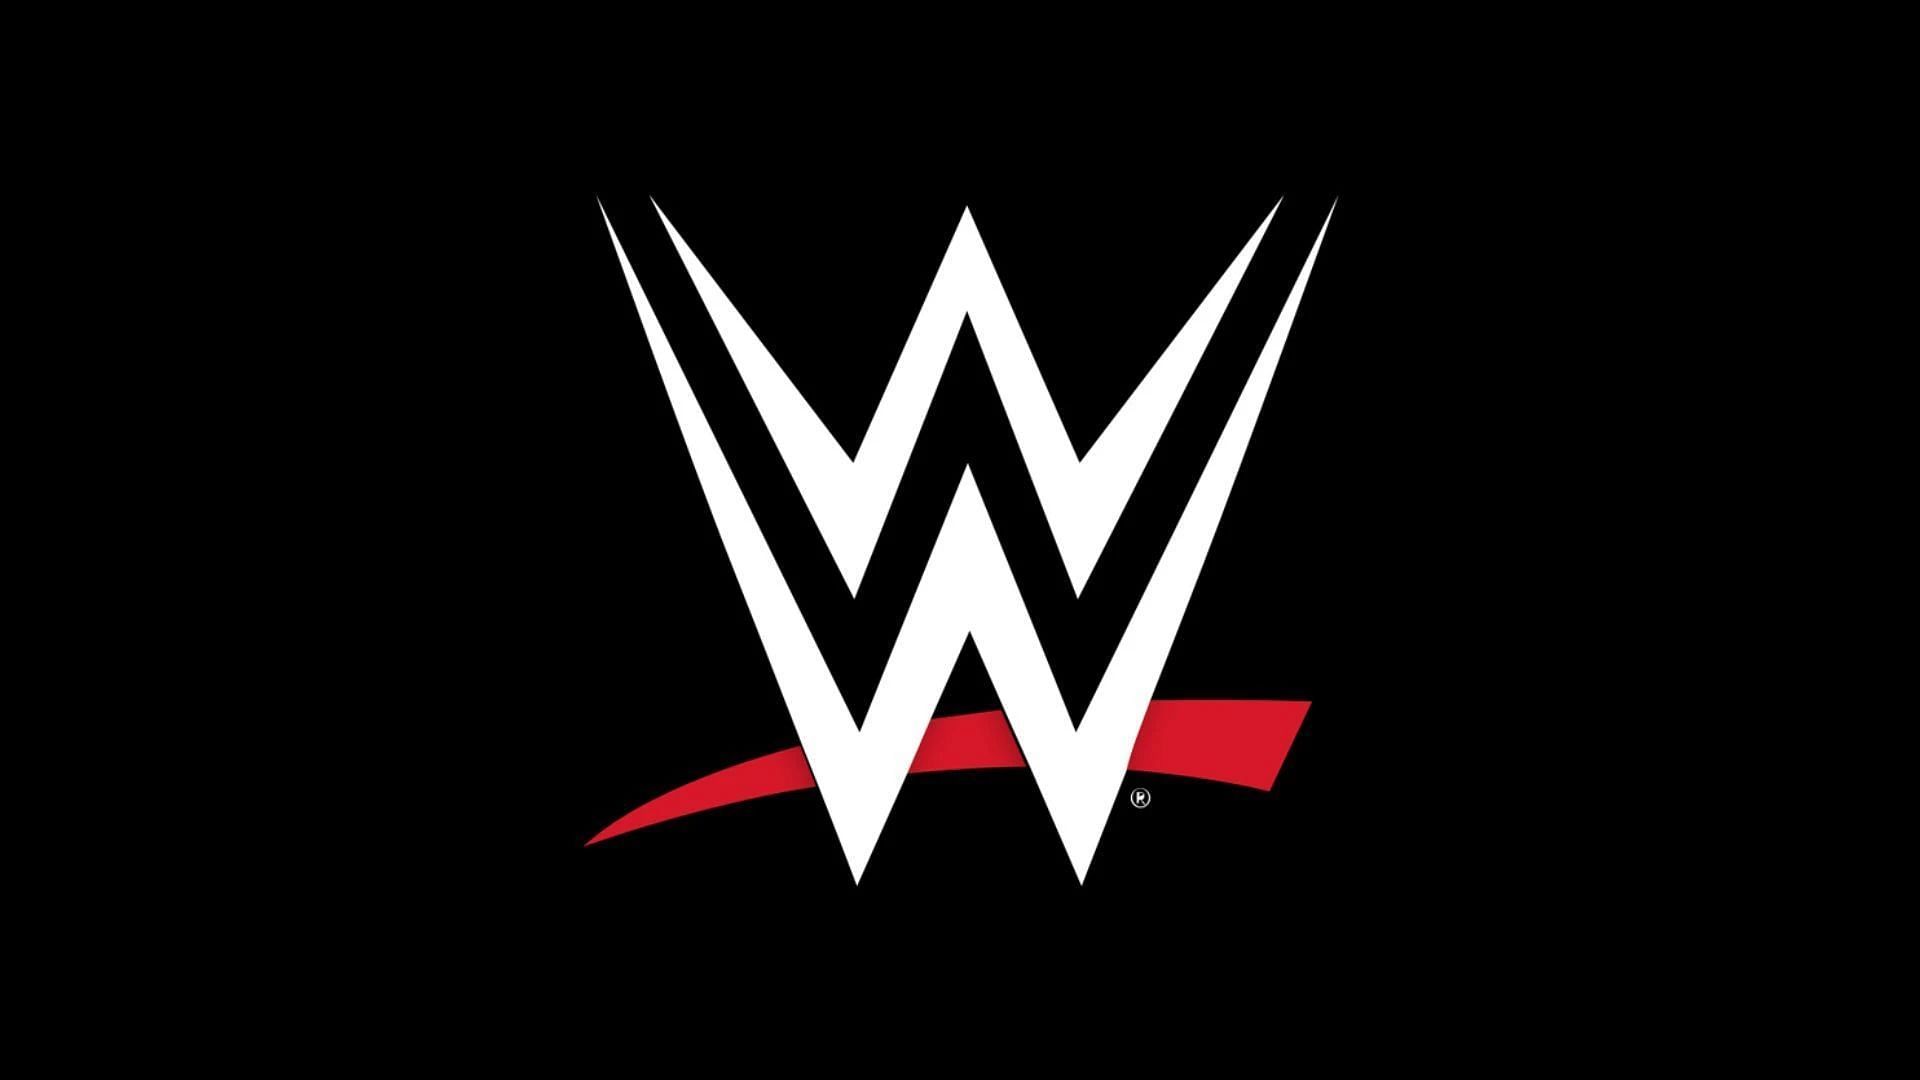 The WWE talent roster has undergone many changes in recent years